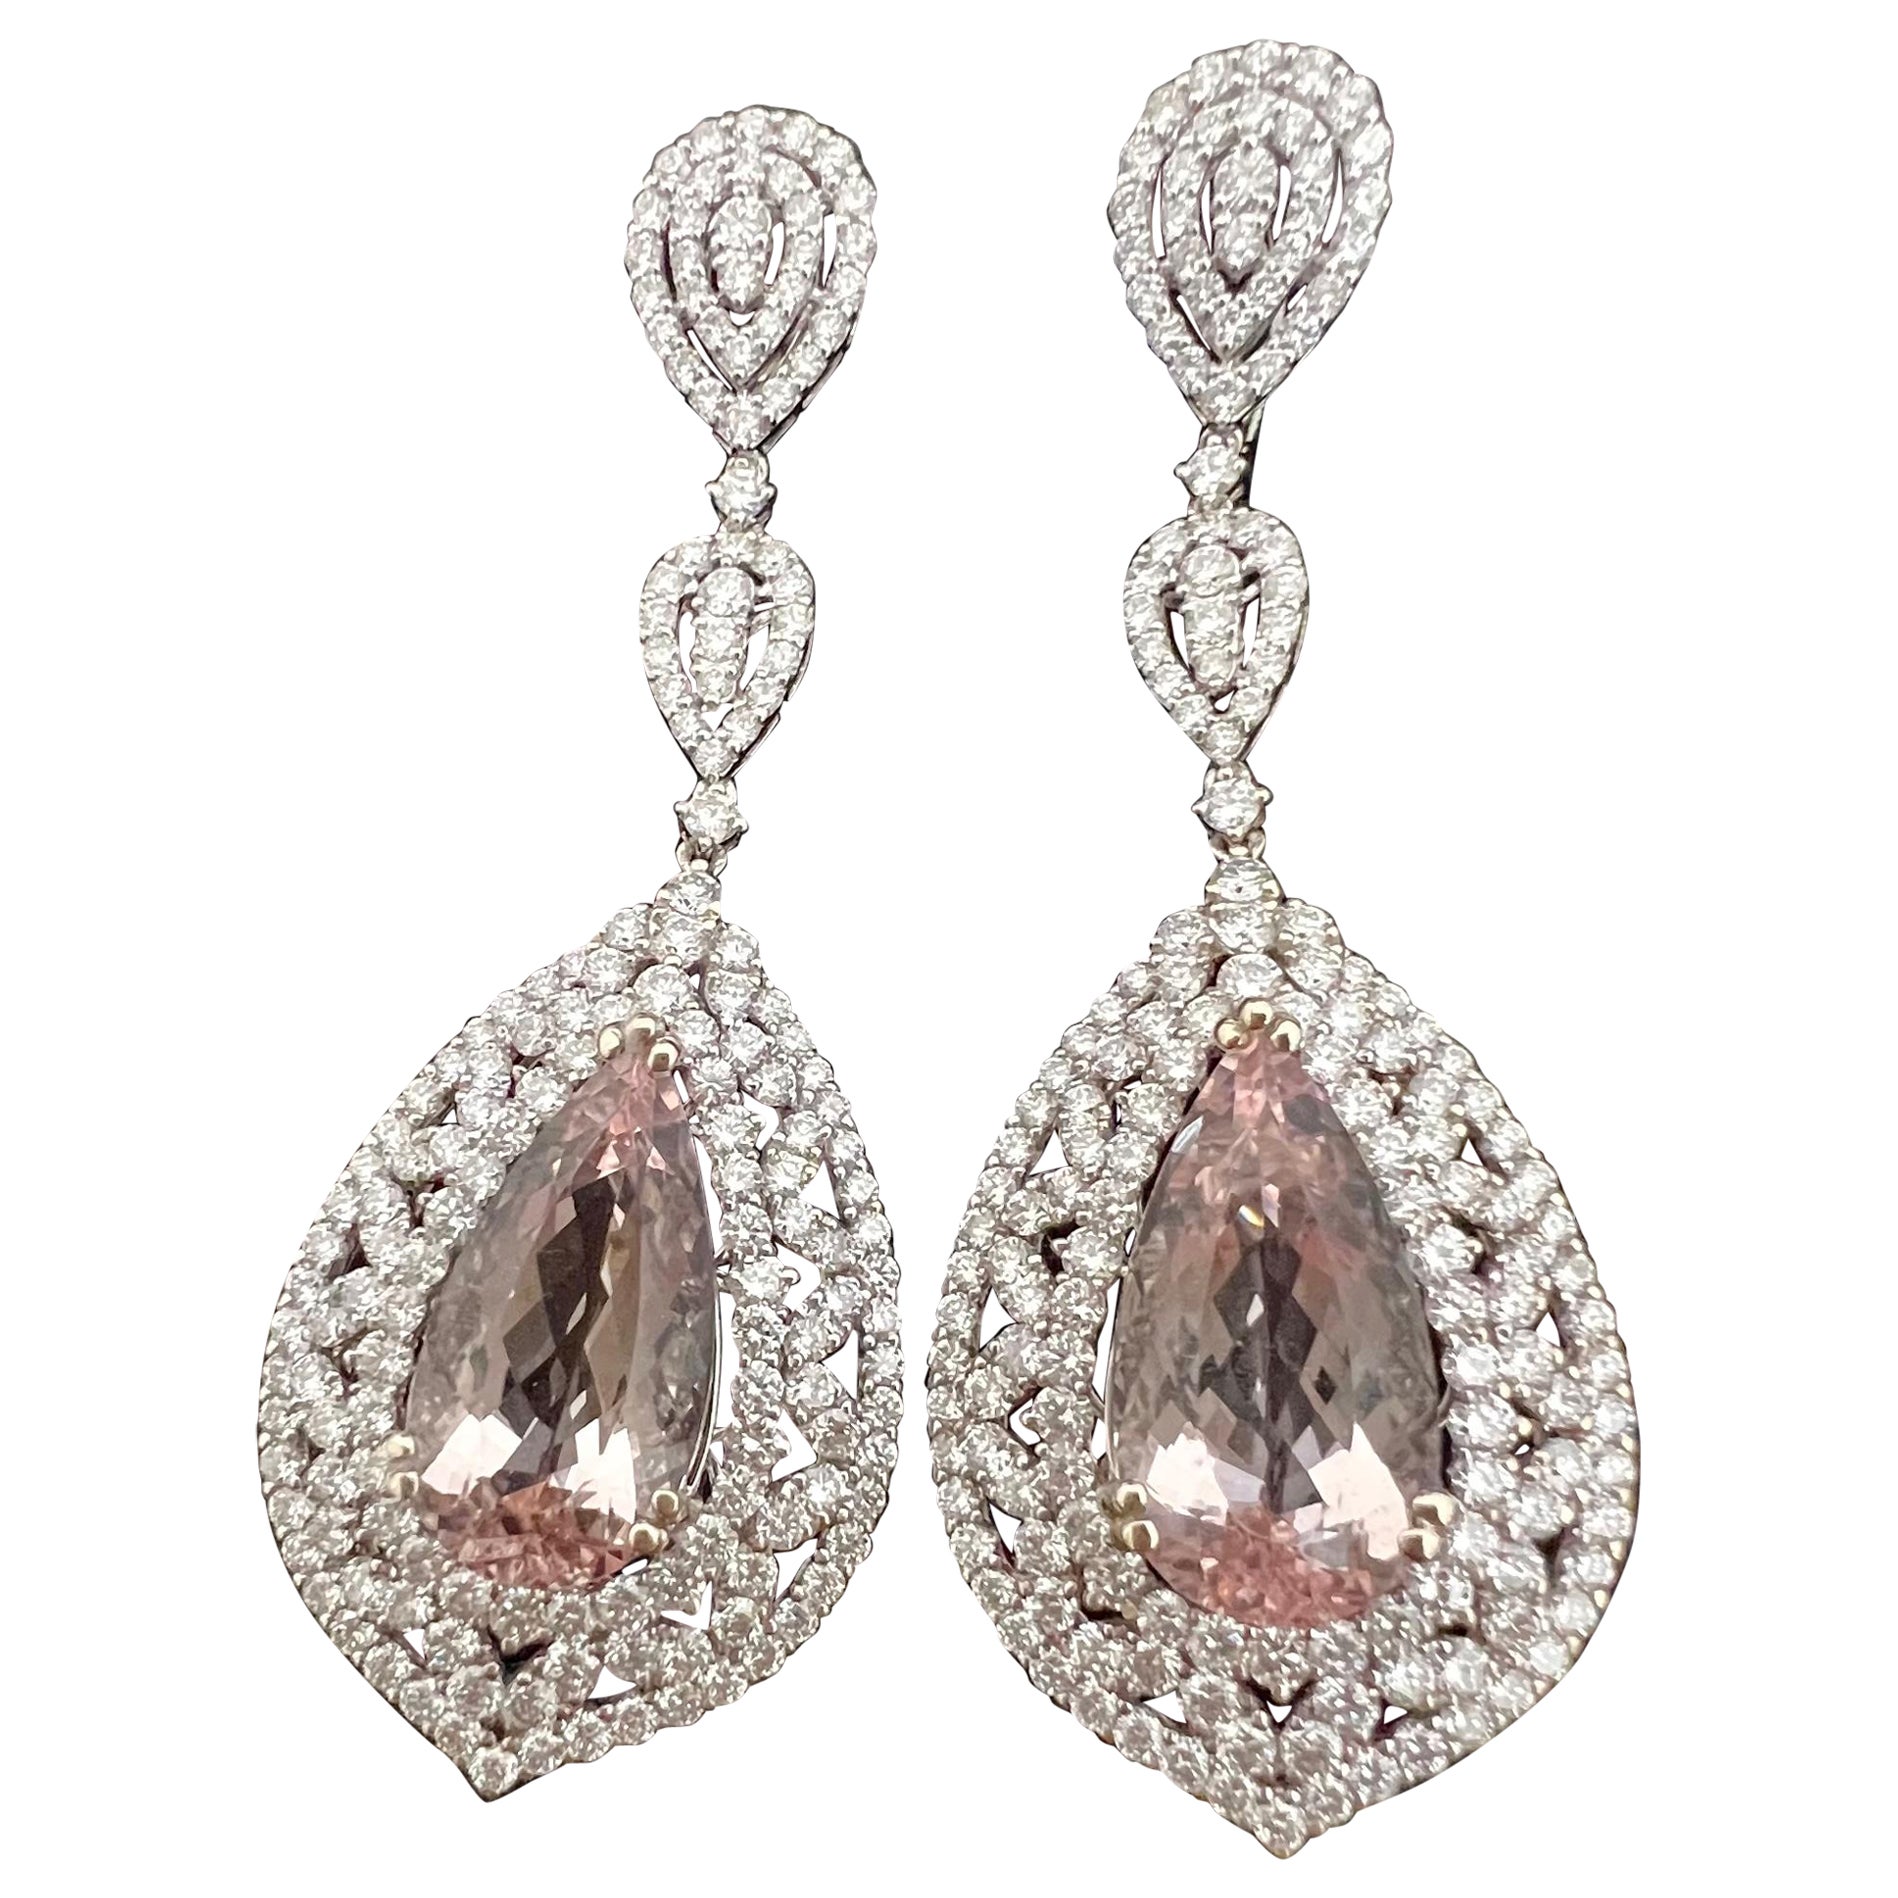 Exquisite 33.85 Carat Pink Morganite and Diamond Earrings in 18K White Gold For Sale